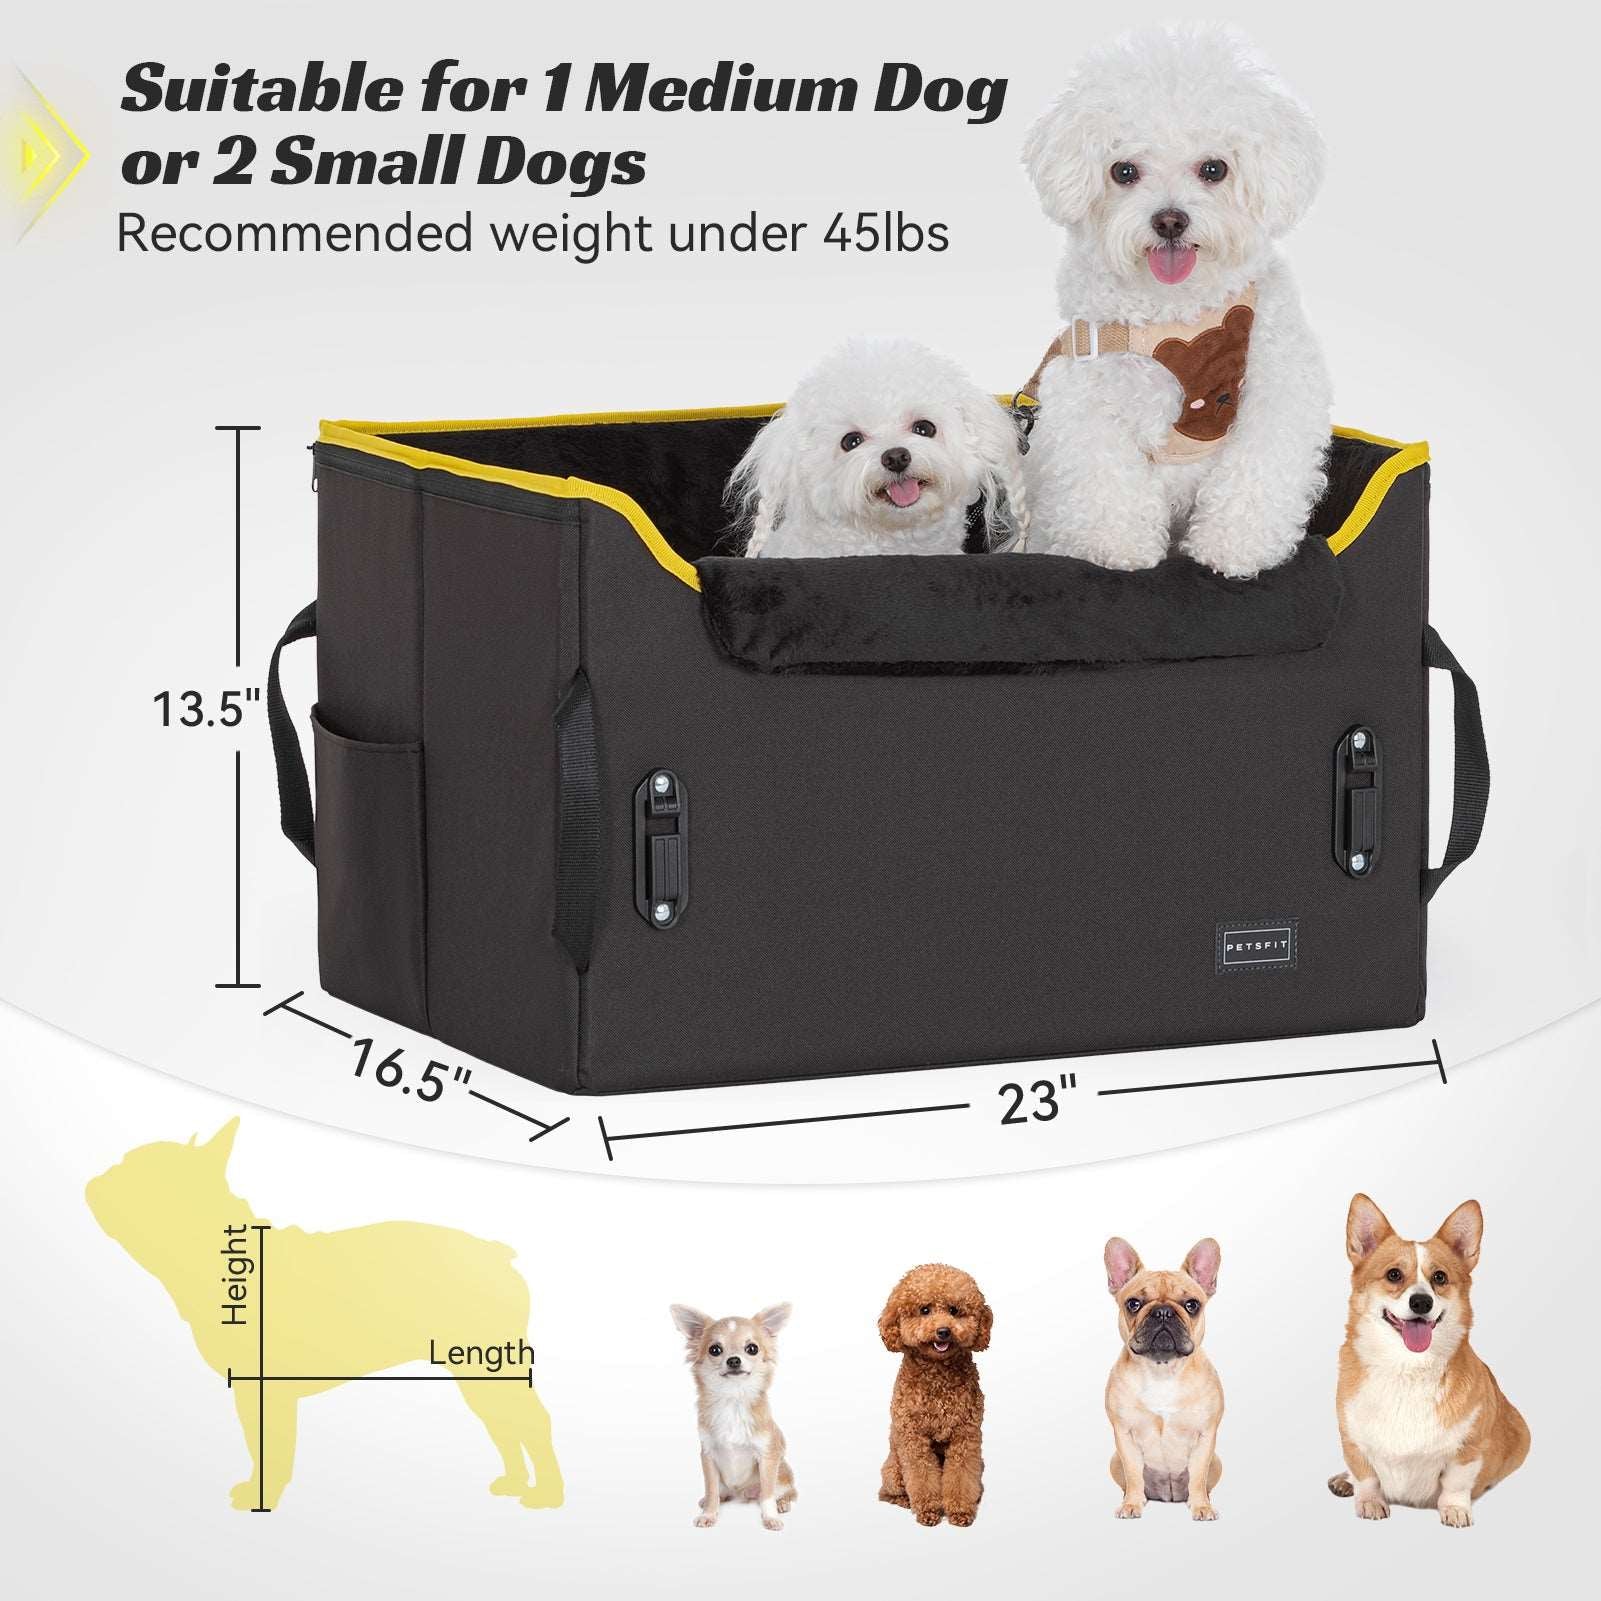 petsfit-dog-booster-car-seat-dog-car-seat-for-medium-dogs-with-2-clip-on-safety-leashes-04